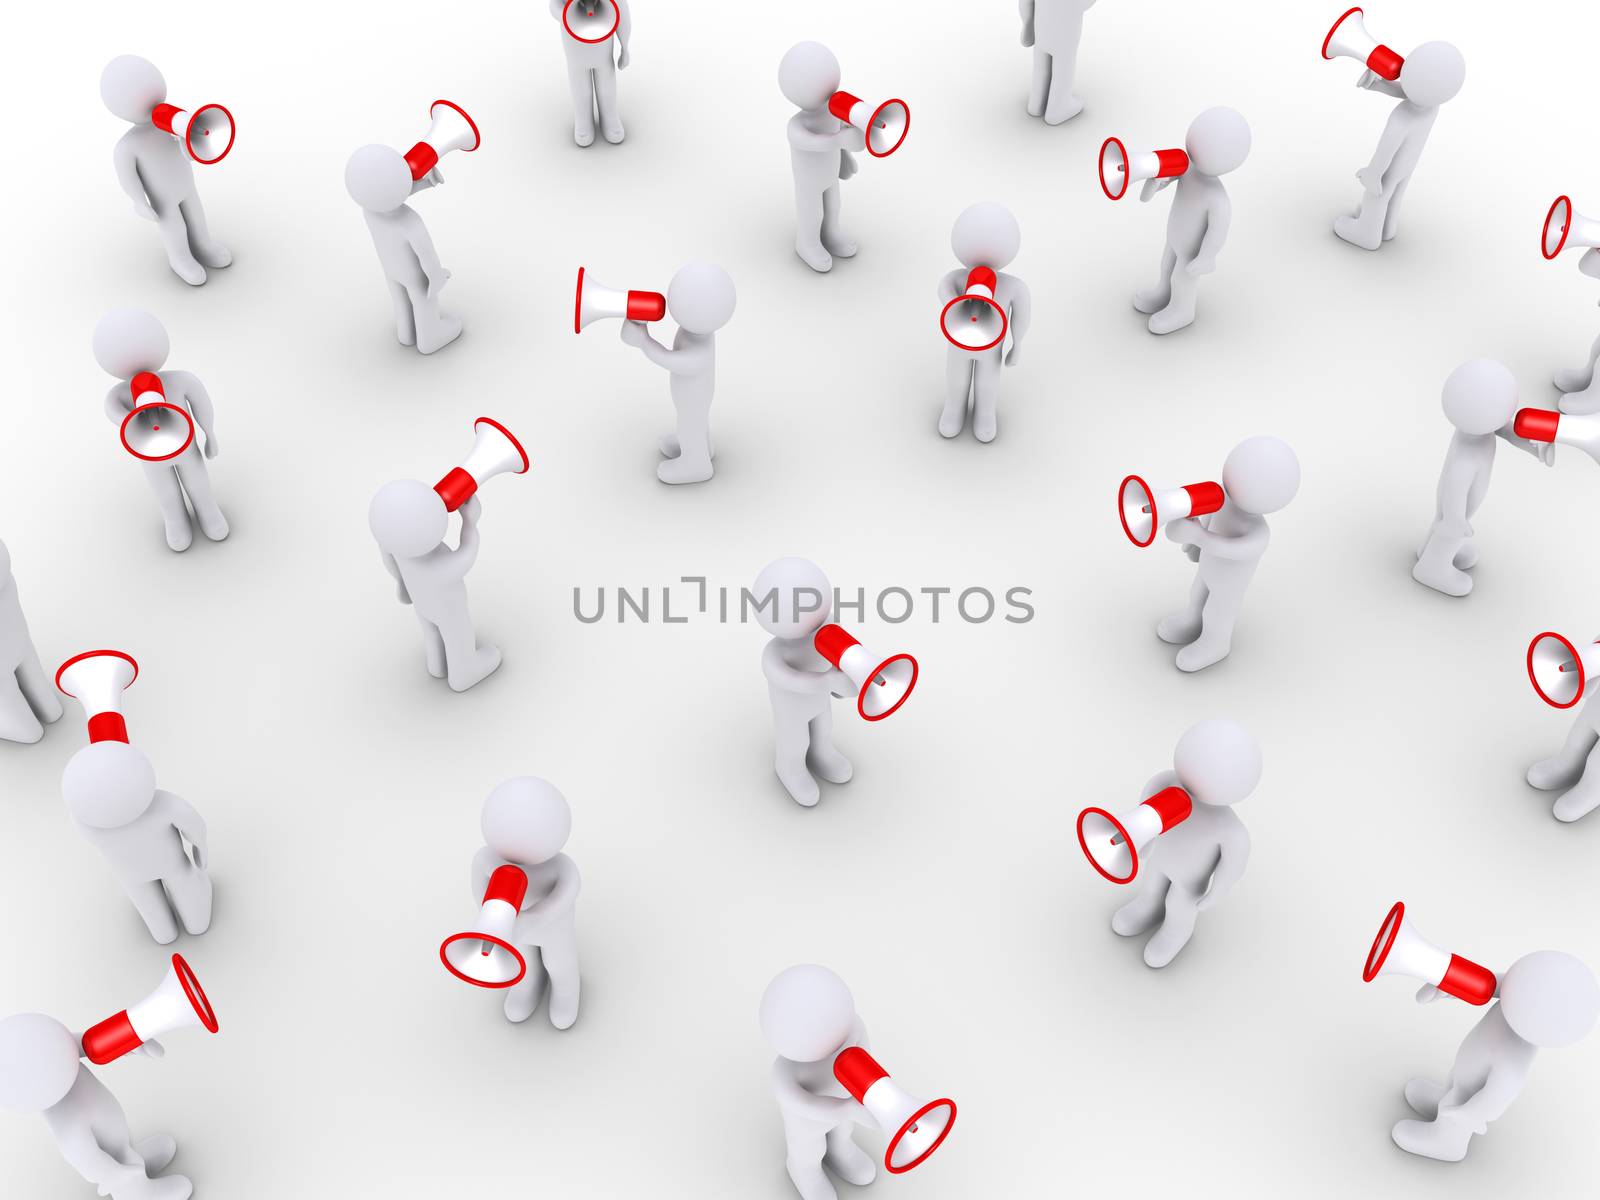 Many 3d people are speaking with megaphones towards different directions